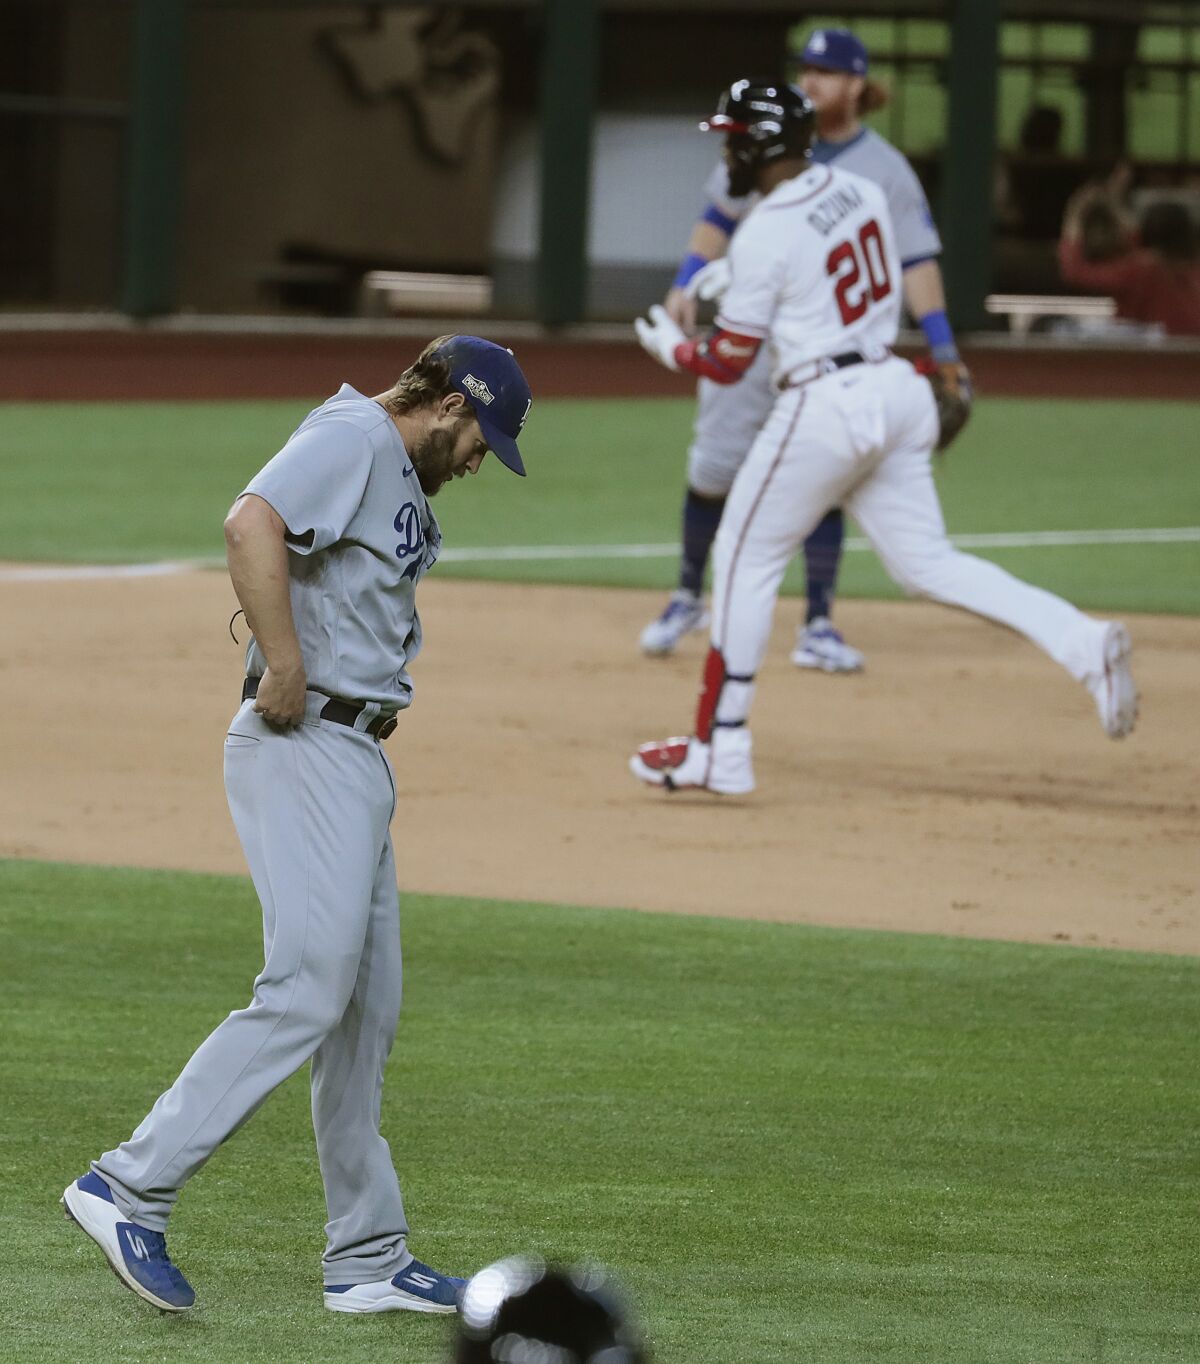 Dodgers pitcher Clayton Kershaw reacts after Braves designated hitter Marcell Ozuna hit a home run in Game 4 of the 2020 NLCS